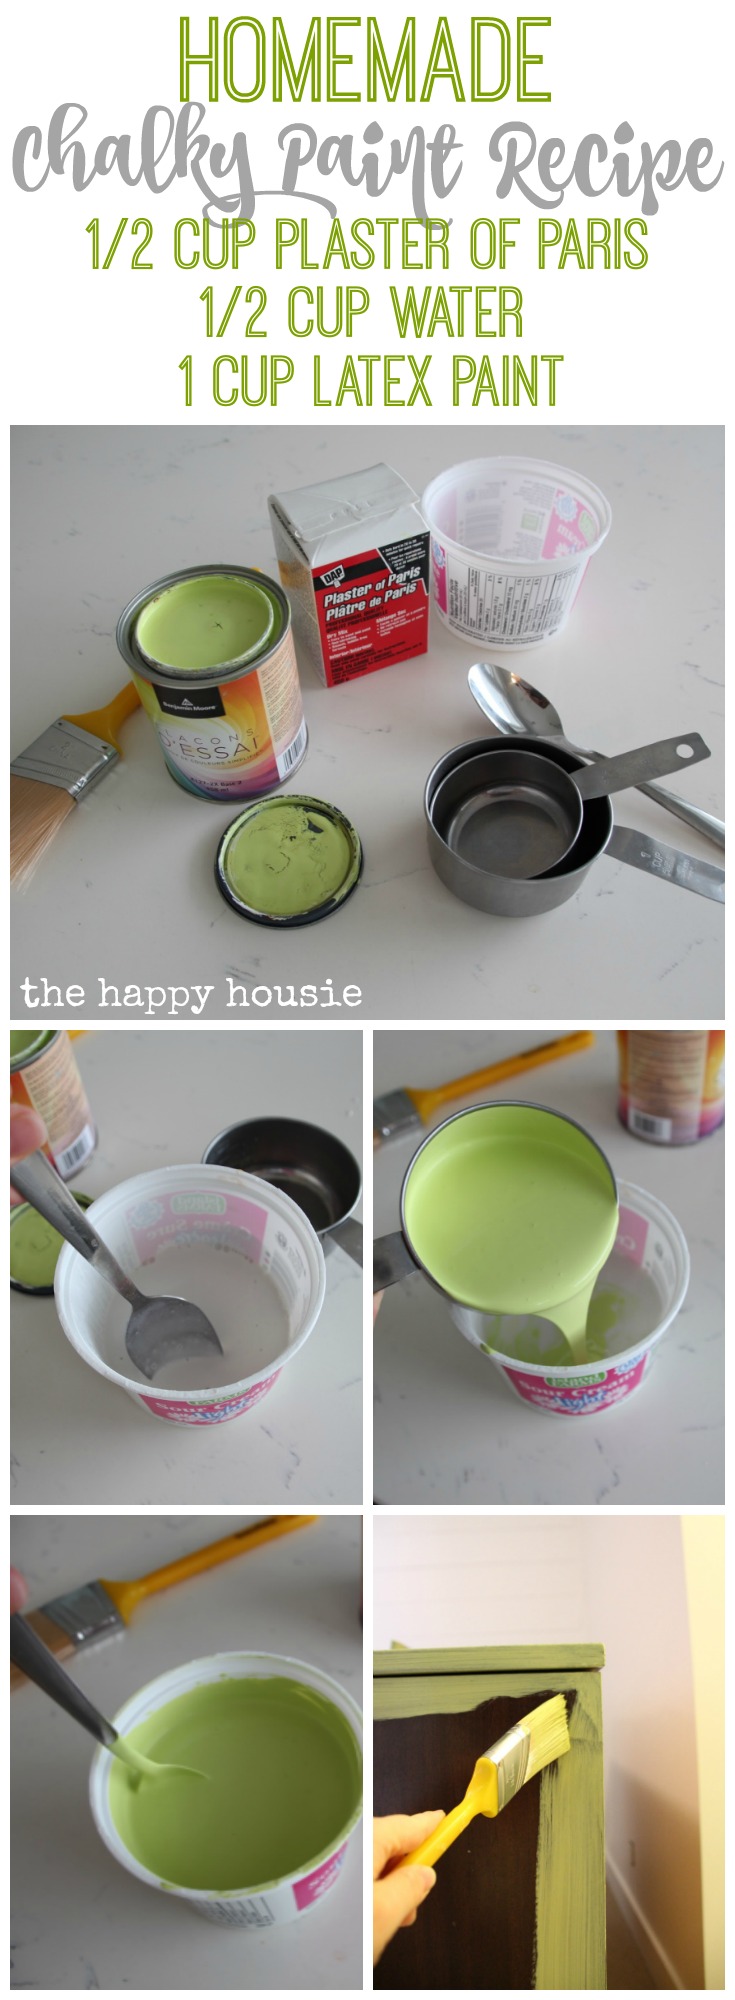 Homemade Chalky Paint Recipe and tutorial at the happy housie.